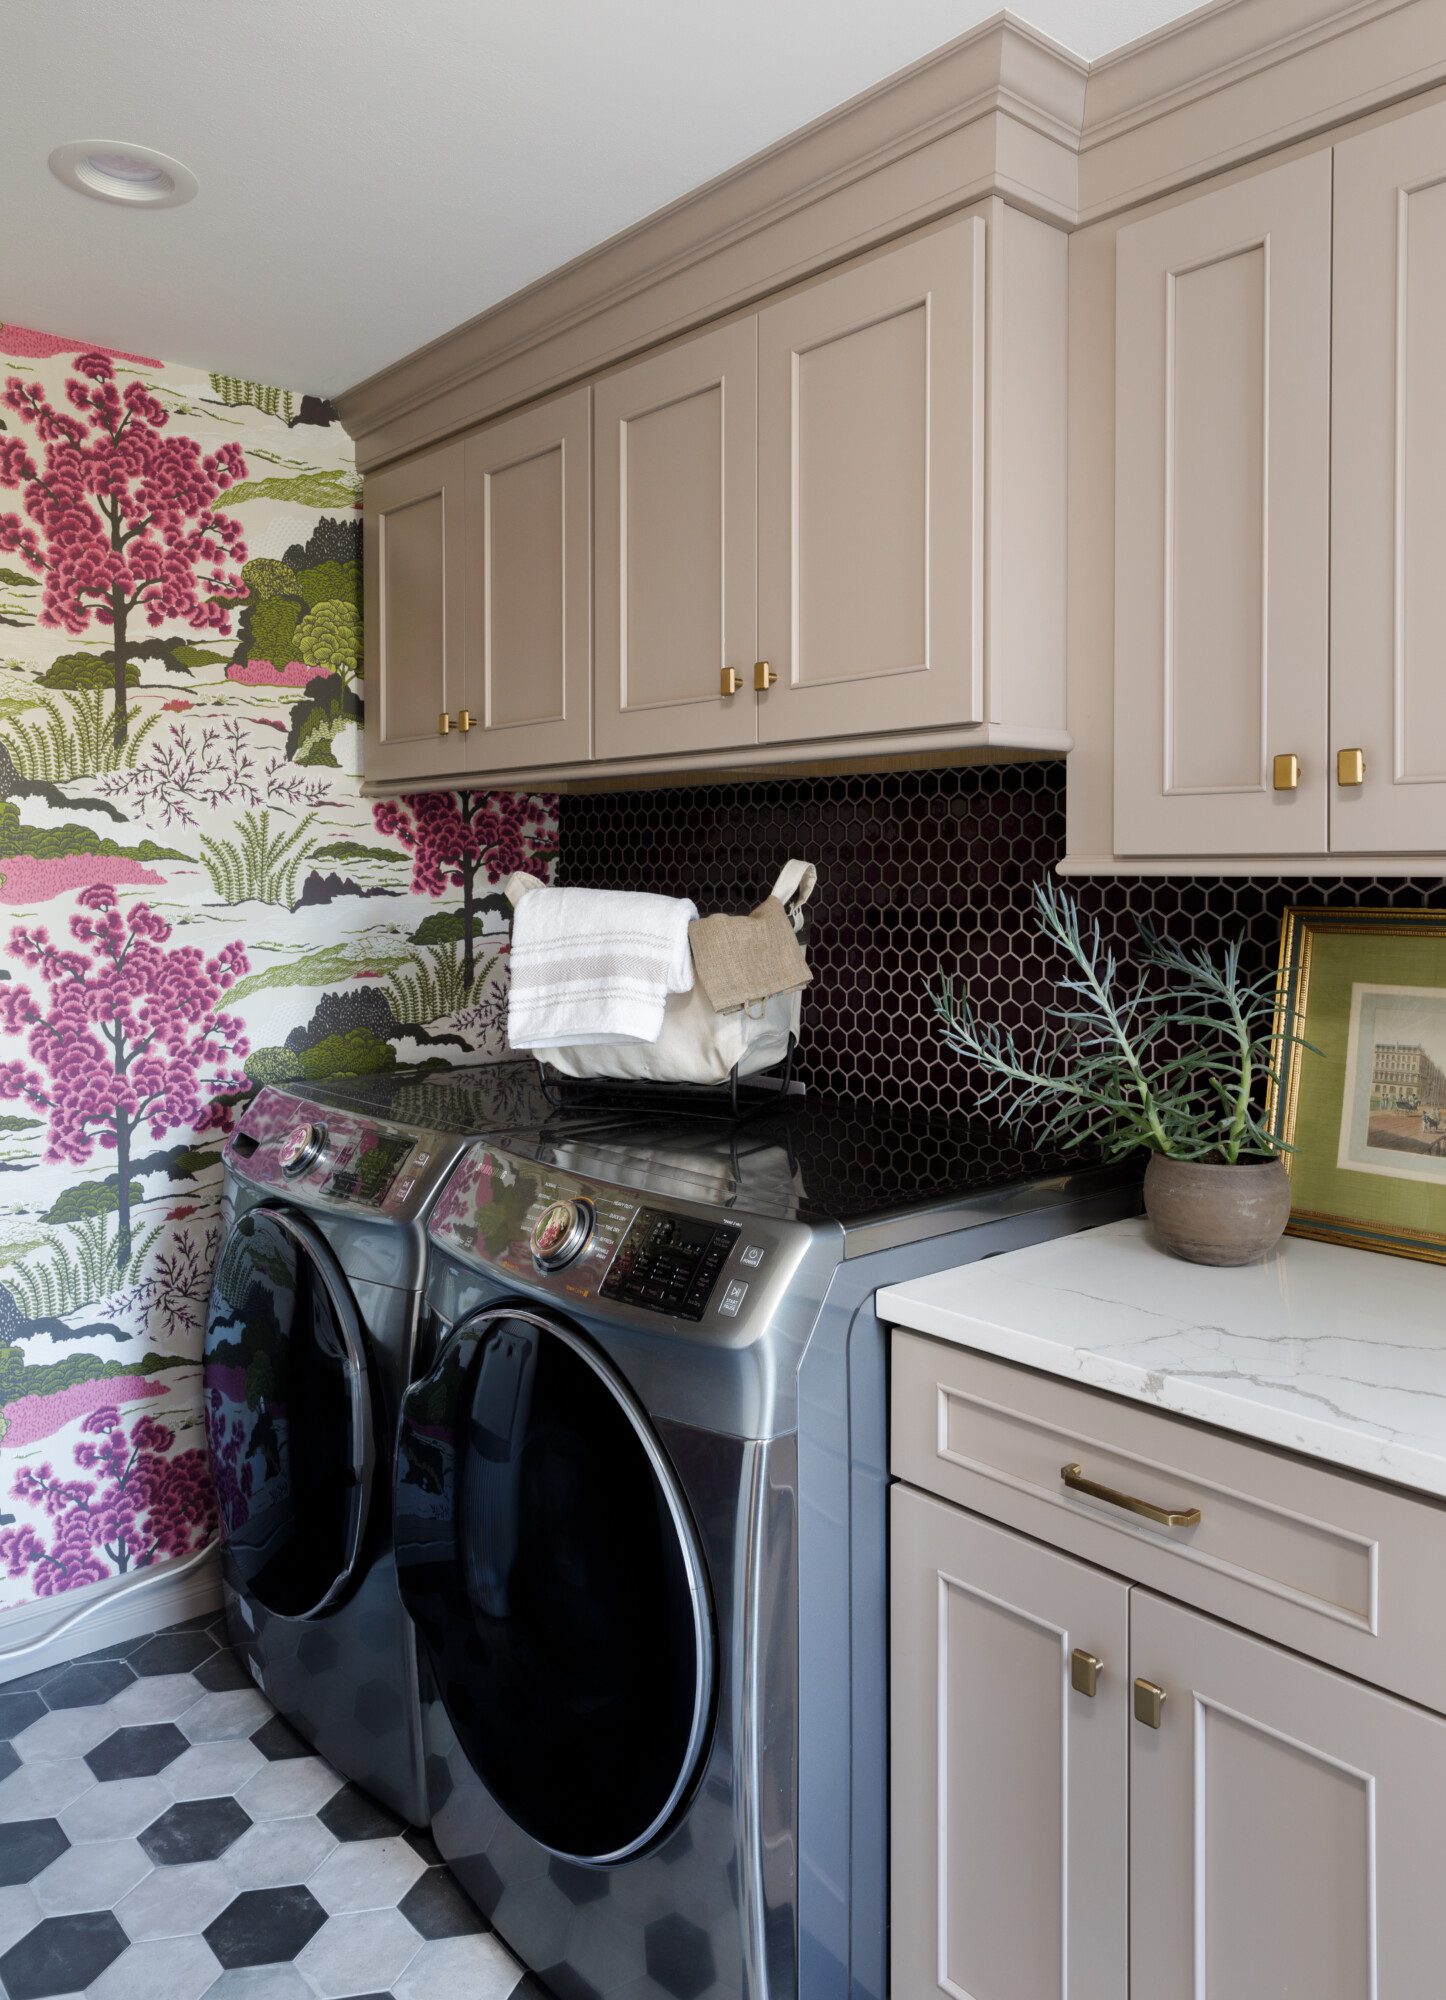 laundry room full of color and patterns